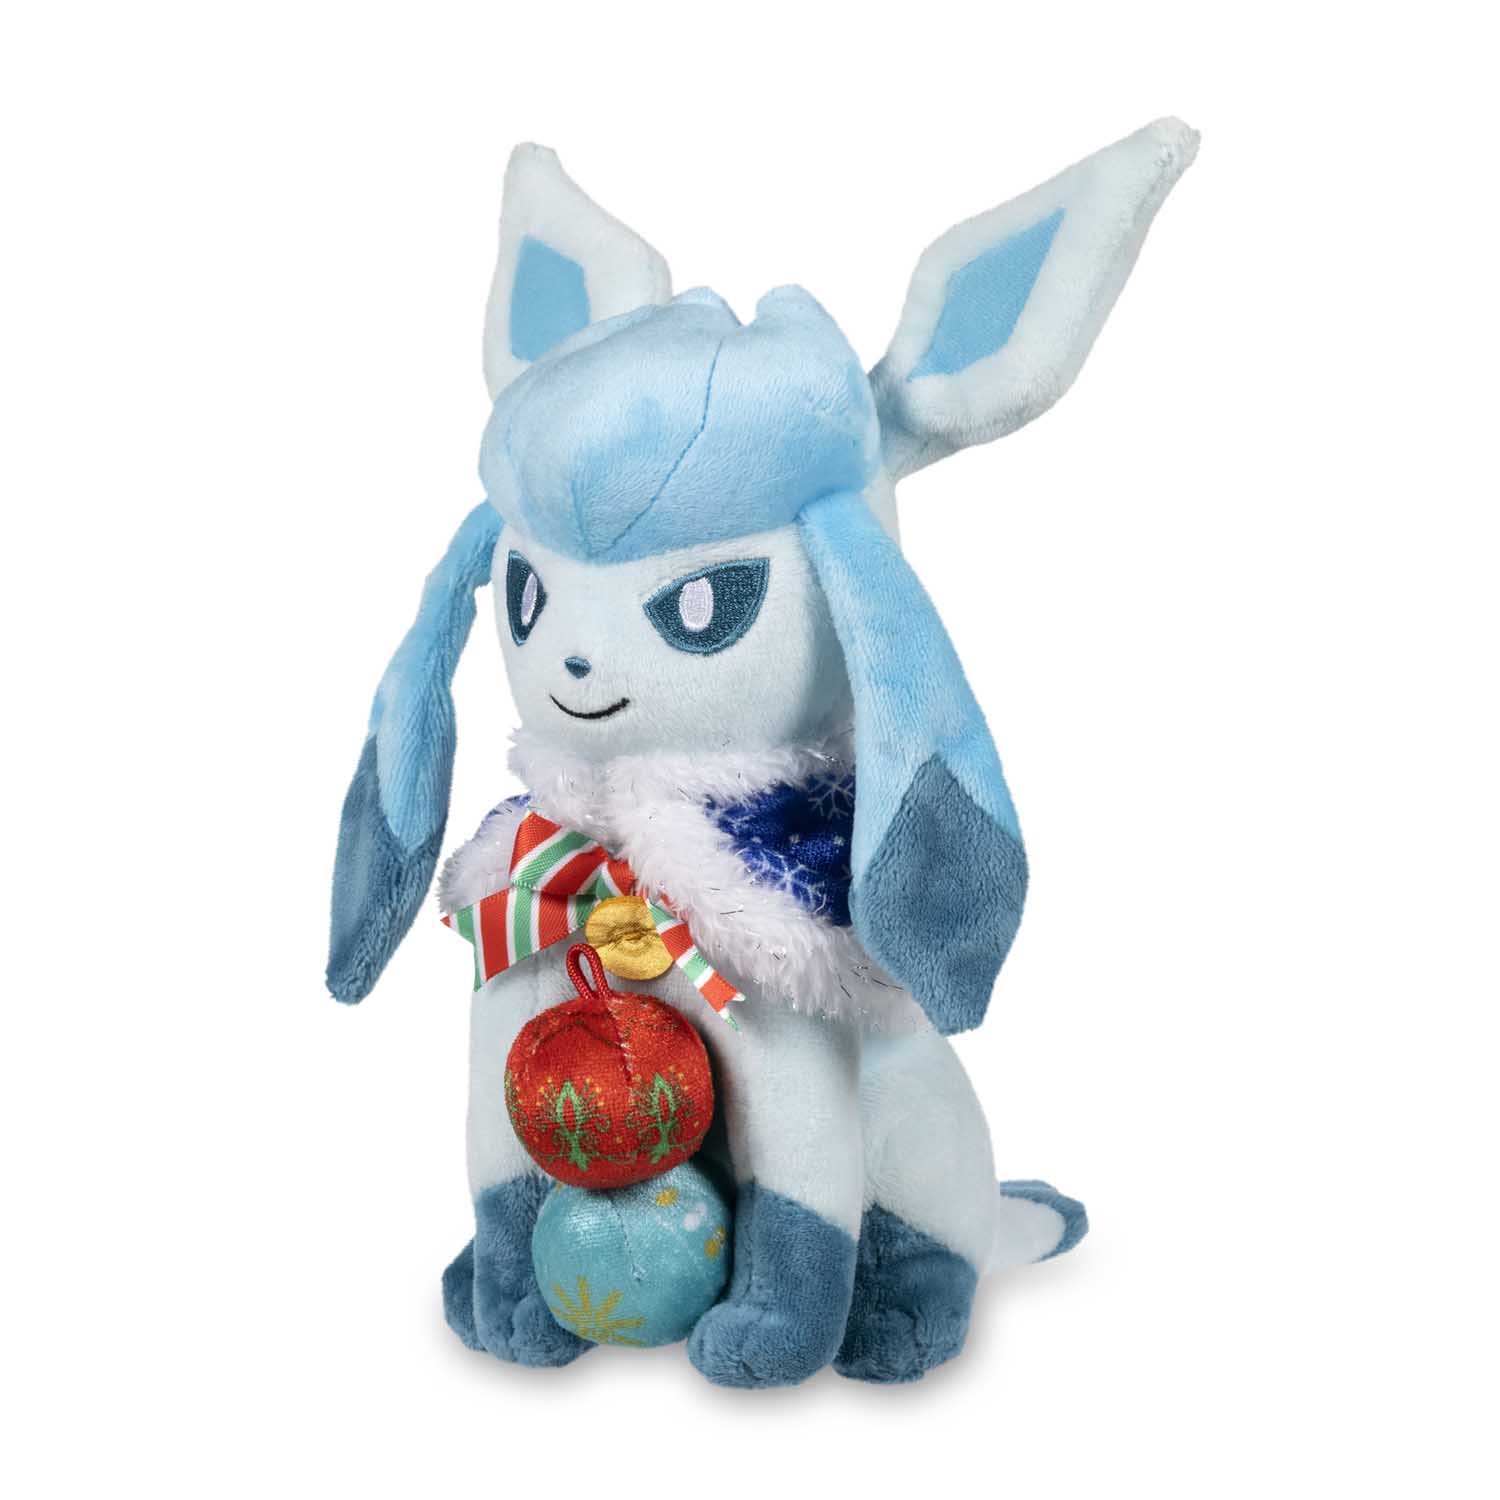 PC_Glaceon_Holiday_Plush_Product_Image.jpg